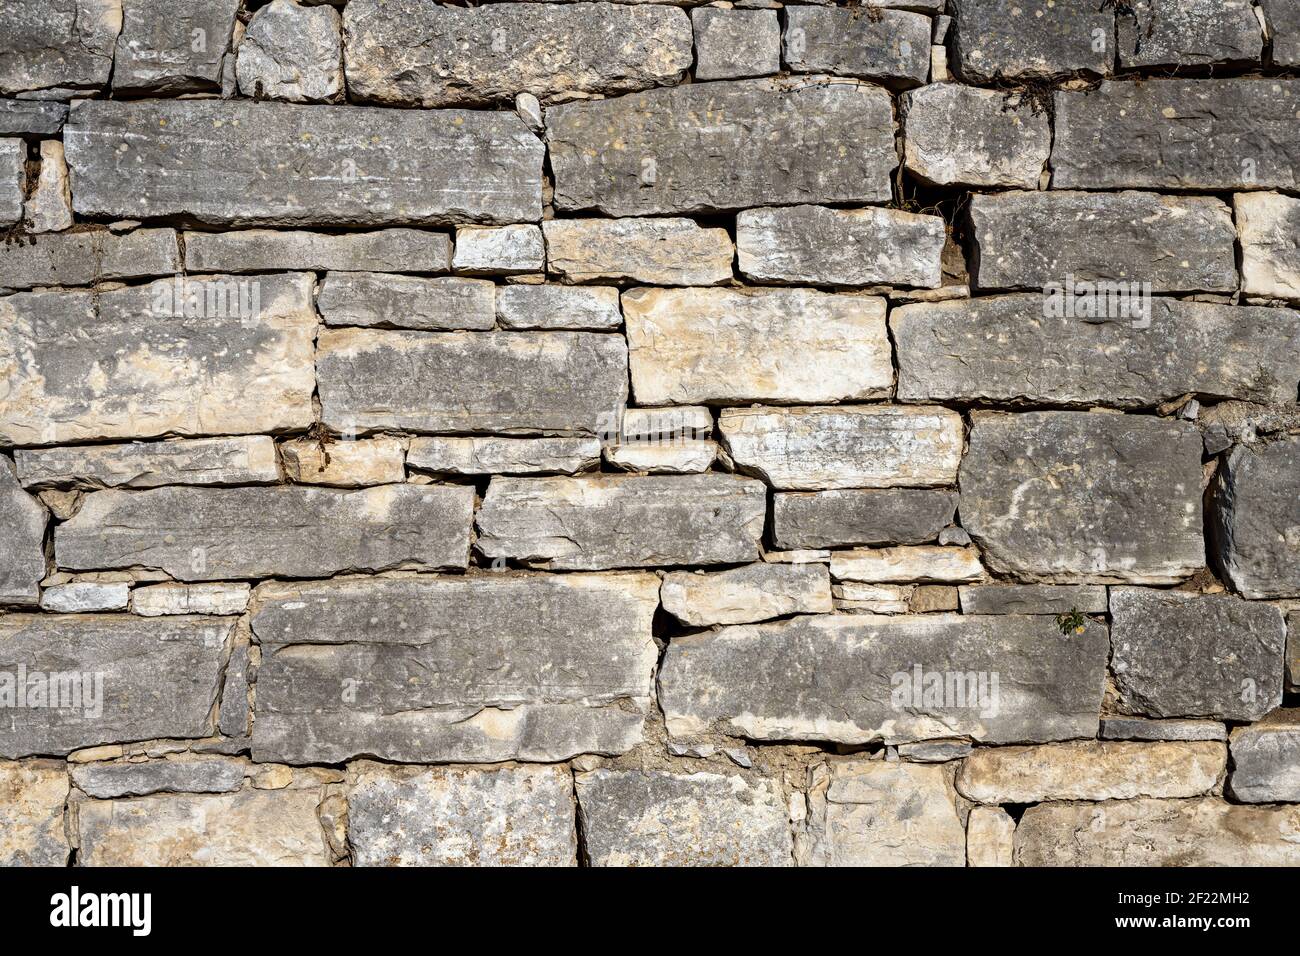 Background from an old and worn natural stone wall Stock Photo